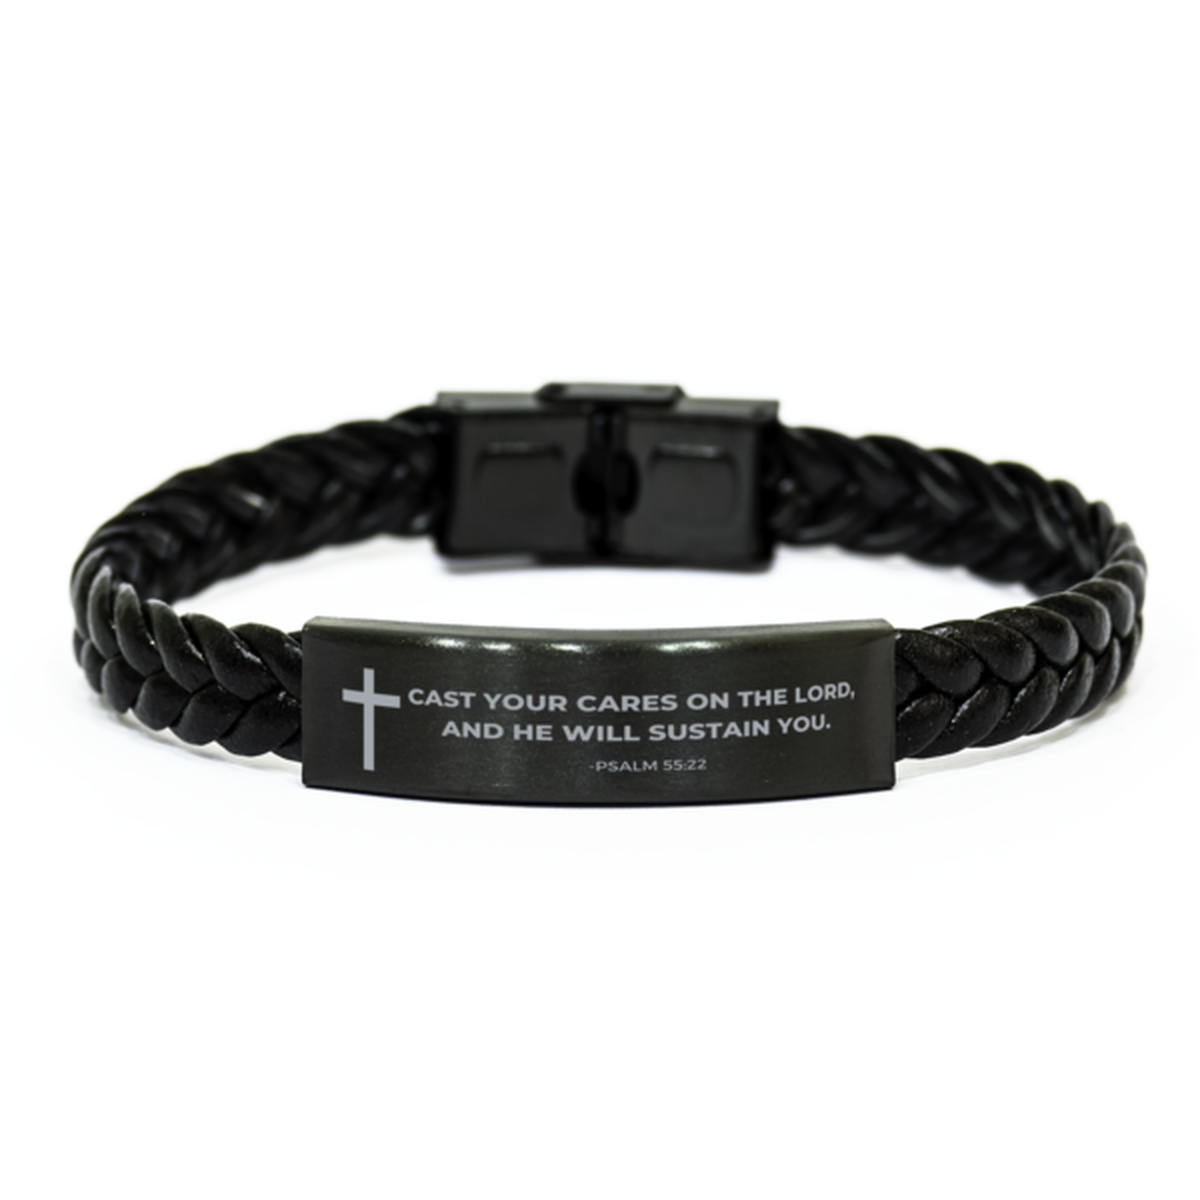 Baptism Gifts For Teenage Boys Girls, Christian Bible Verse Braided Leather Bracelet, Cast your cares on the Lord, Catholic Confirmation Gifts for Son, Godson, Grandson, Nephew